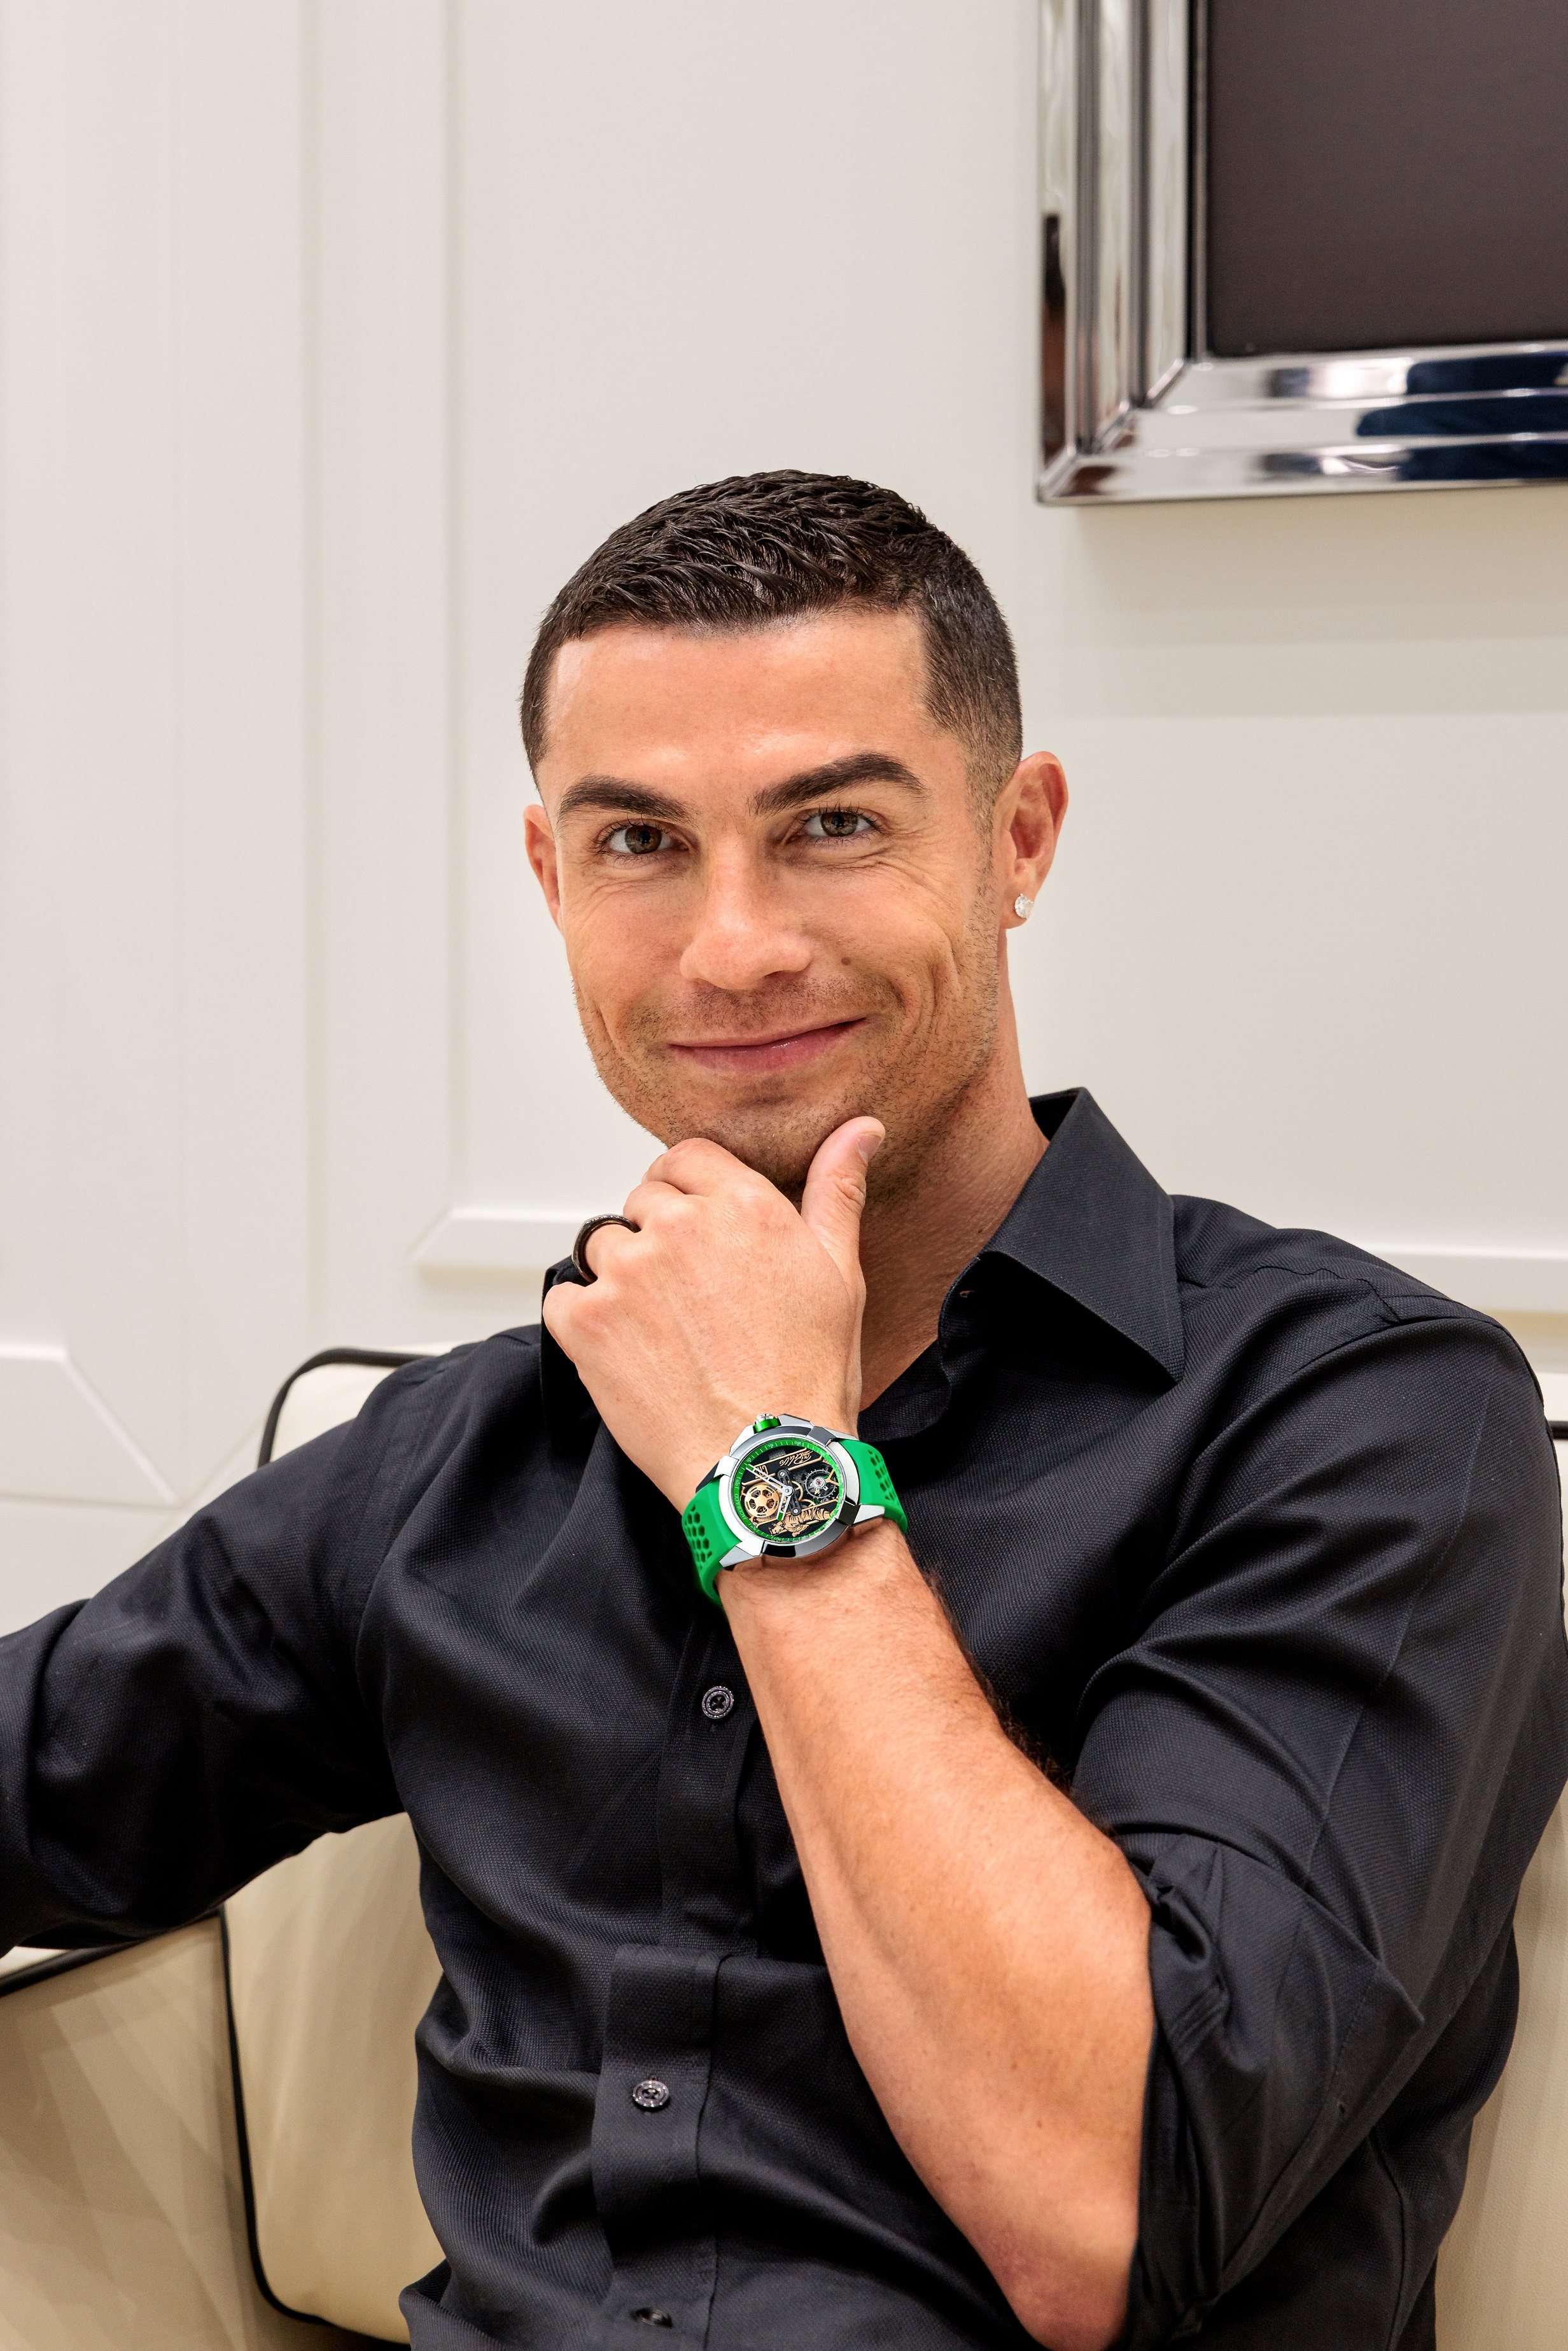 Cristiano Ronaldo is a watch fan ... but that doesn’t mean he needs to sink millions into his hobby. Why are celebrities so in love with high horology? 